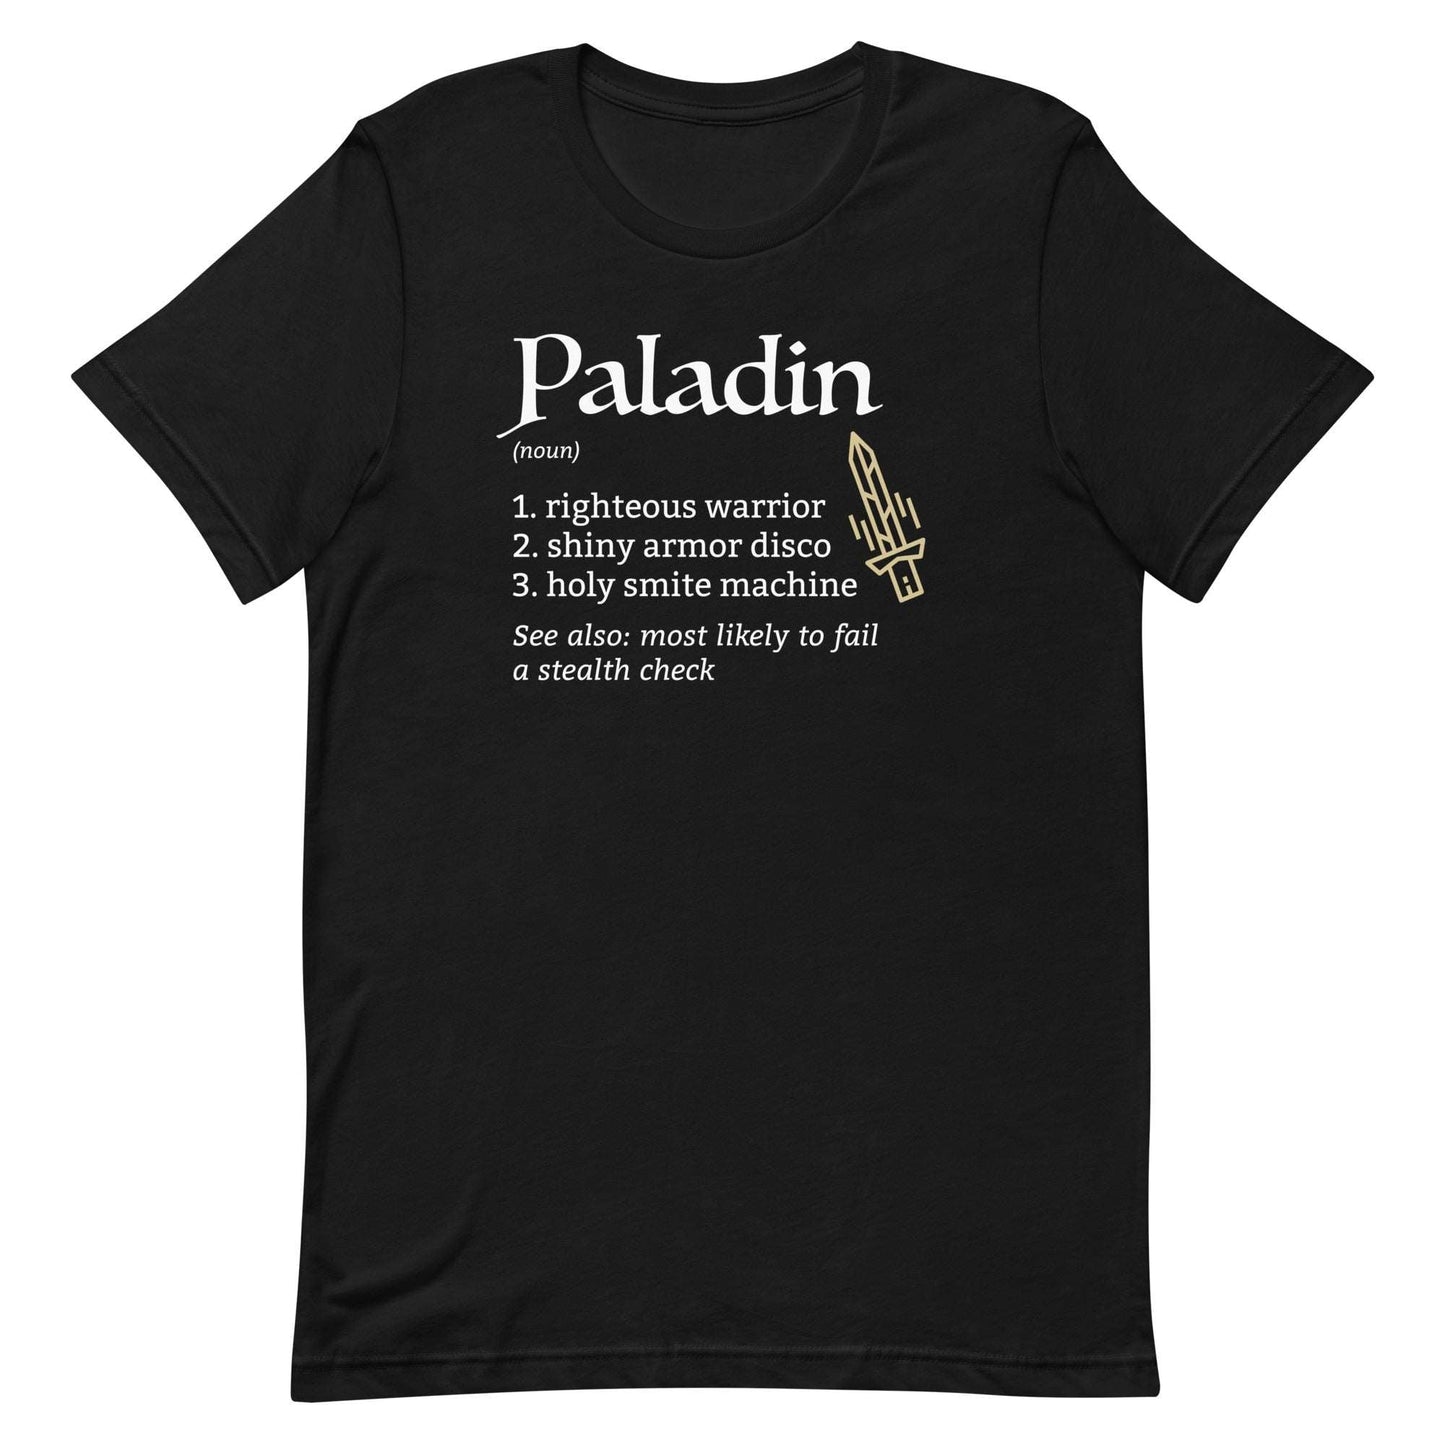 Paladin Class Definition T-Shirt – Funny DnD Definition Tee T-Shirt Black / S